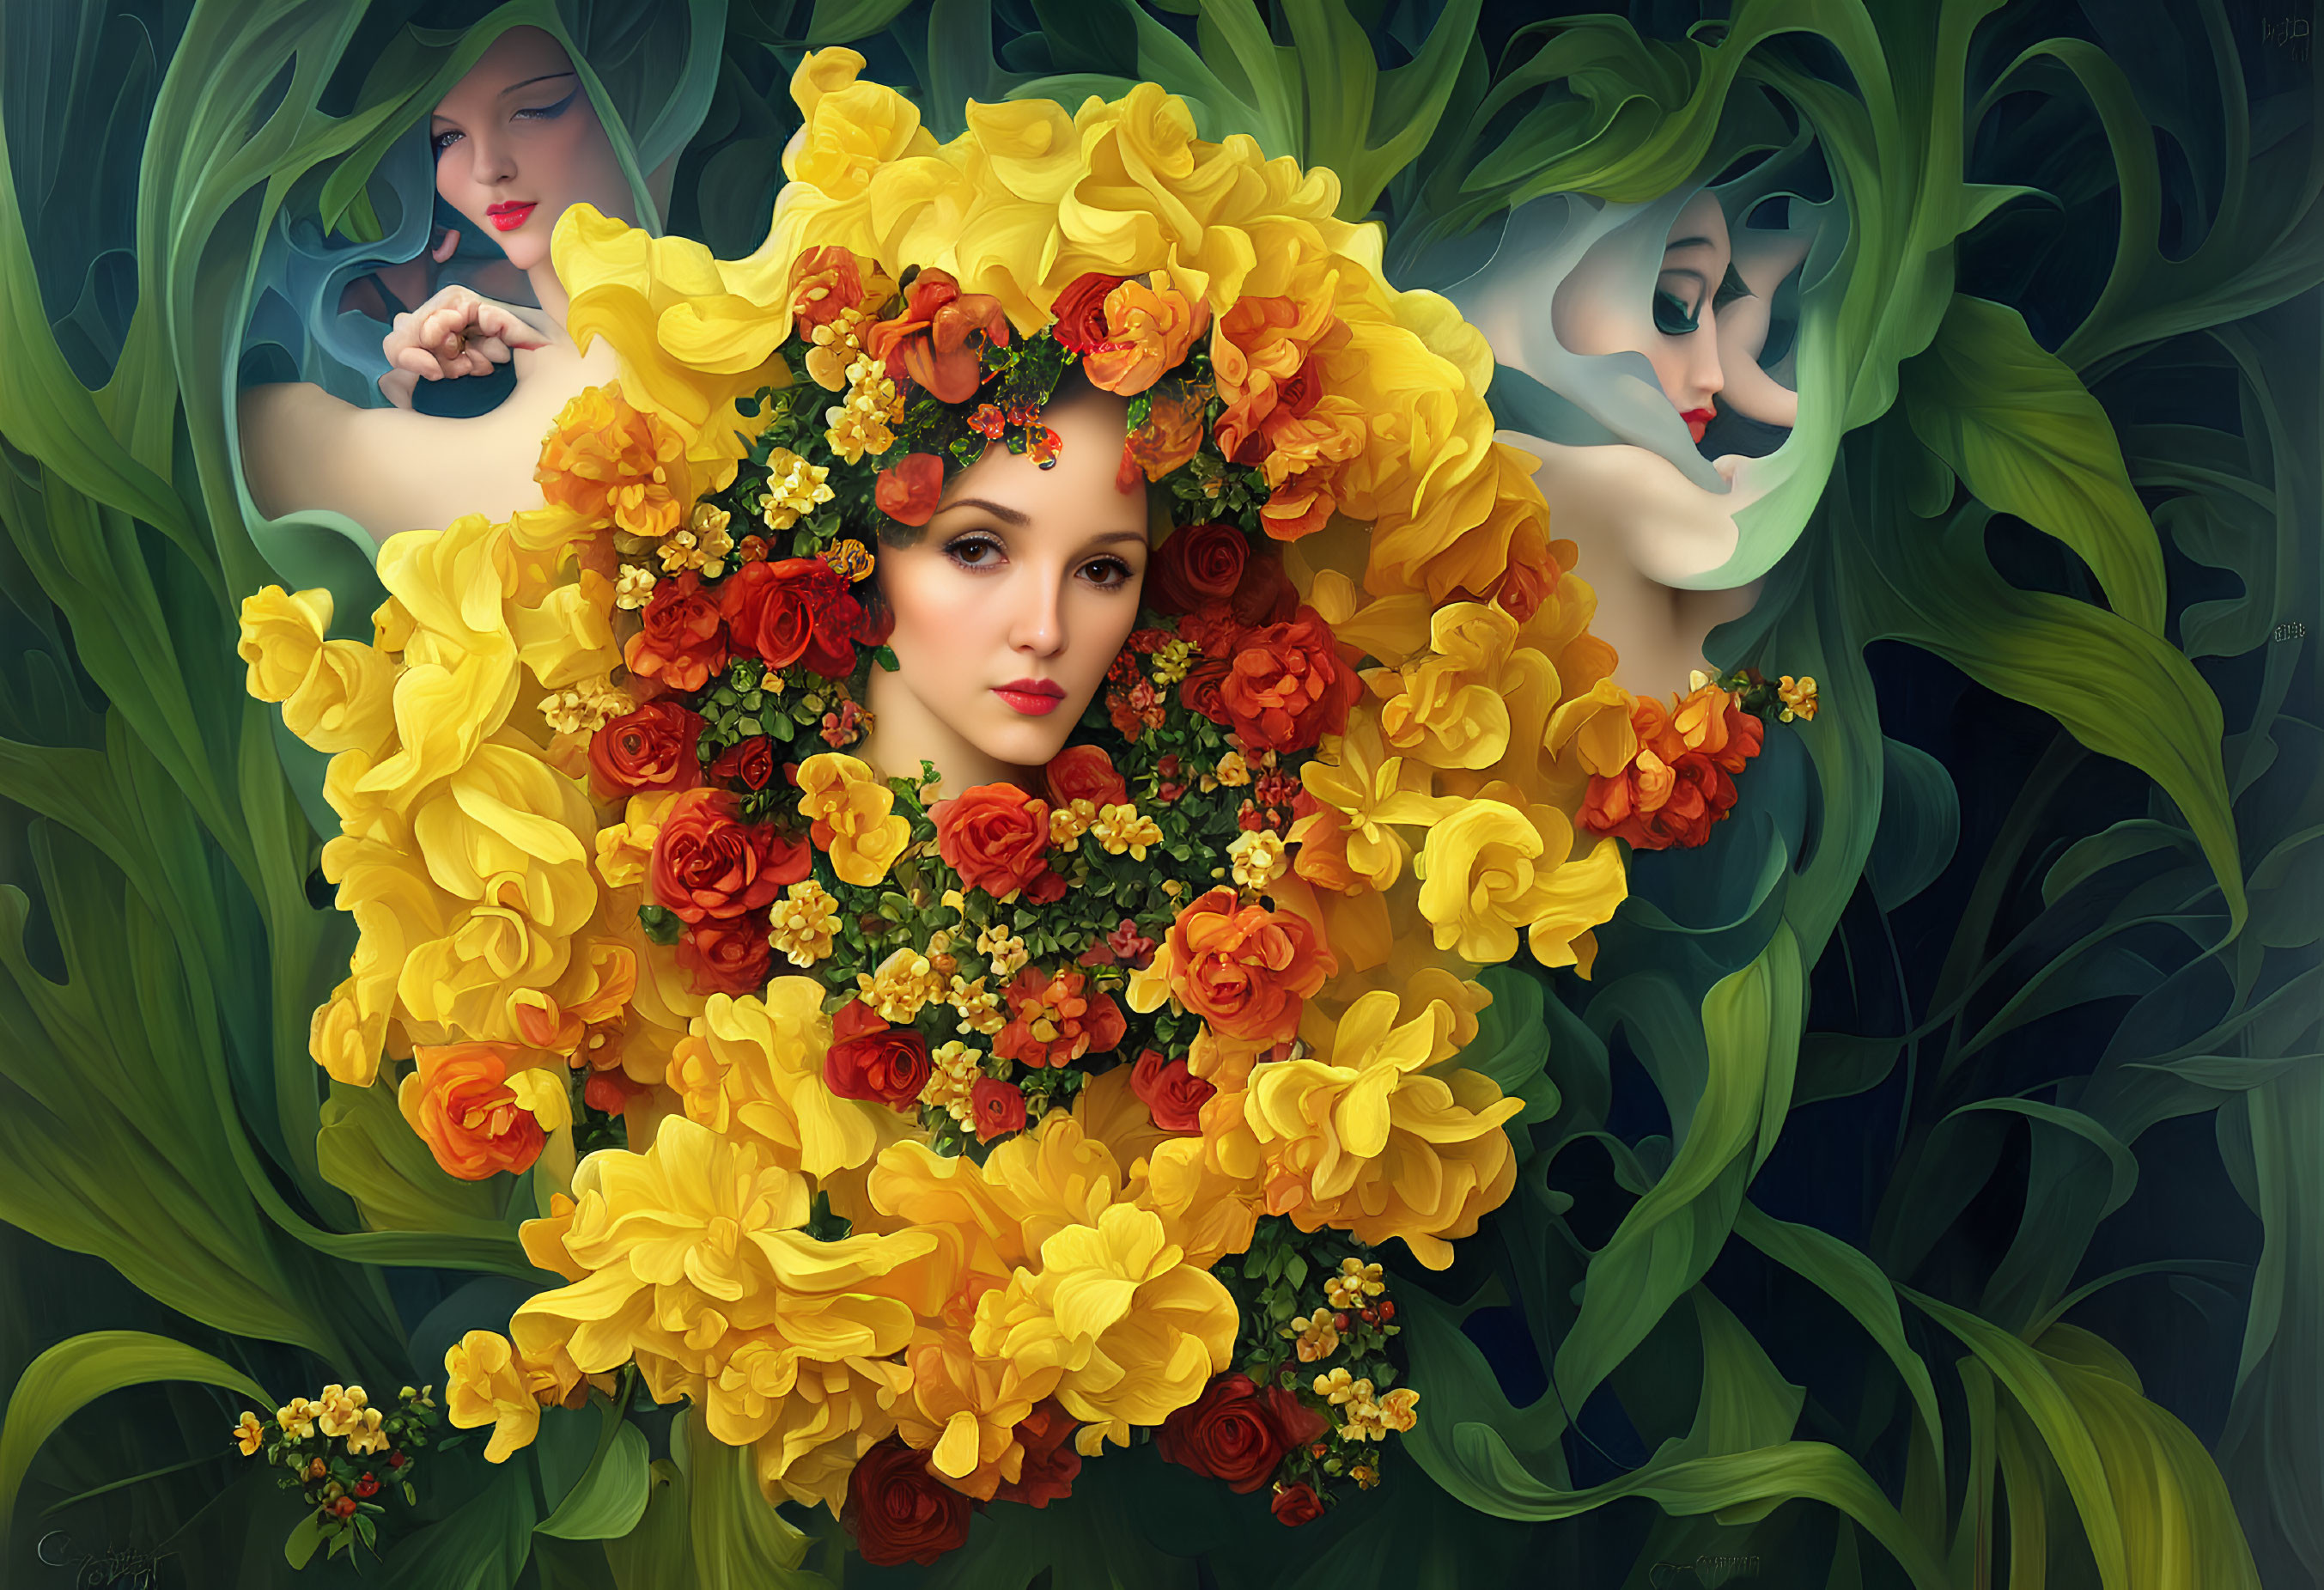 Vibrant portrait of a woman with yellow and orange flowers and hidden faces